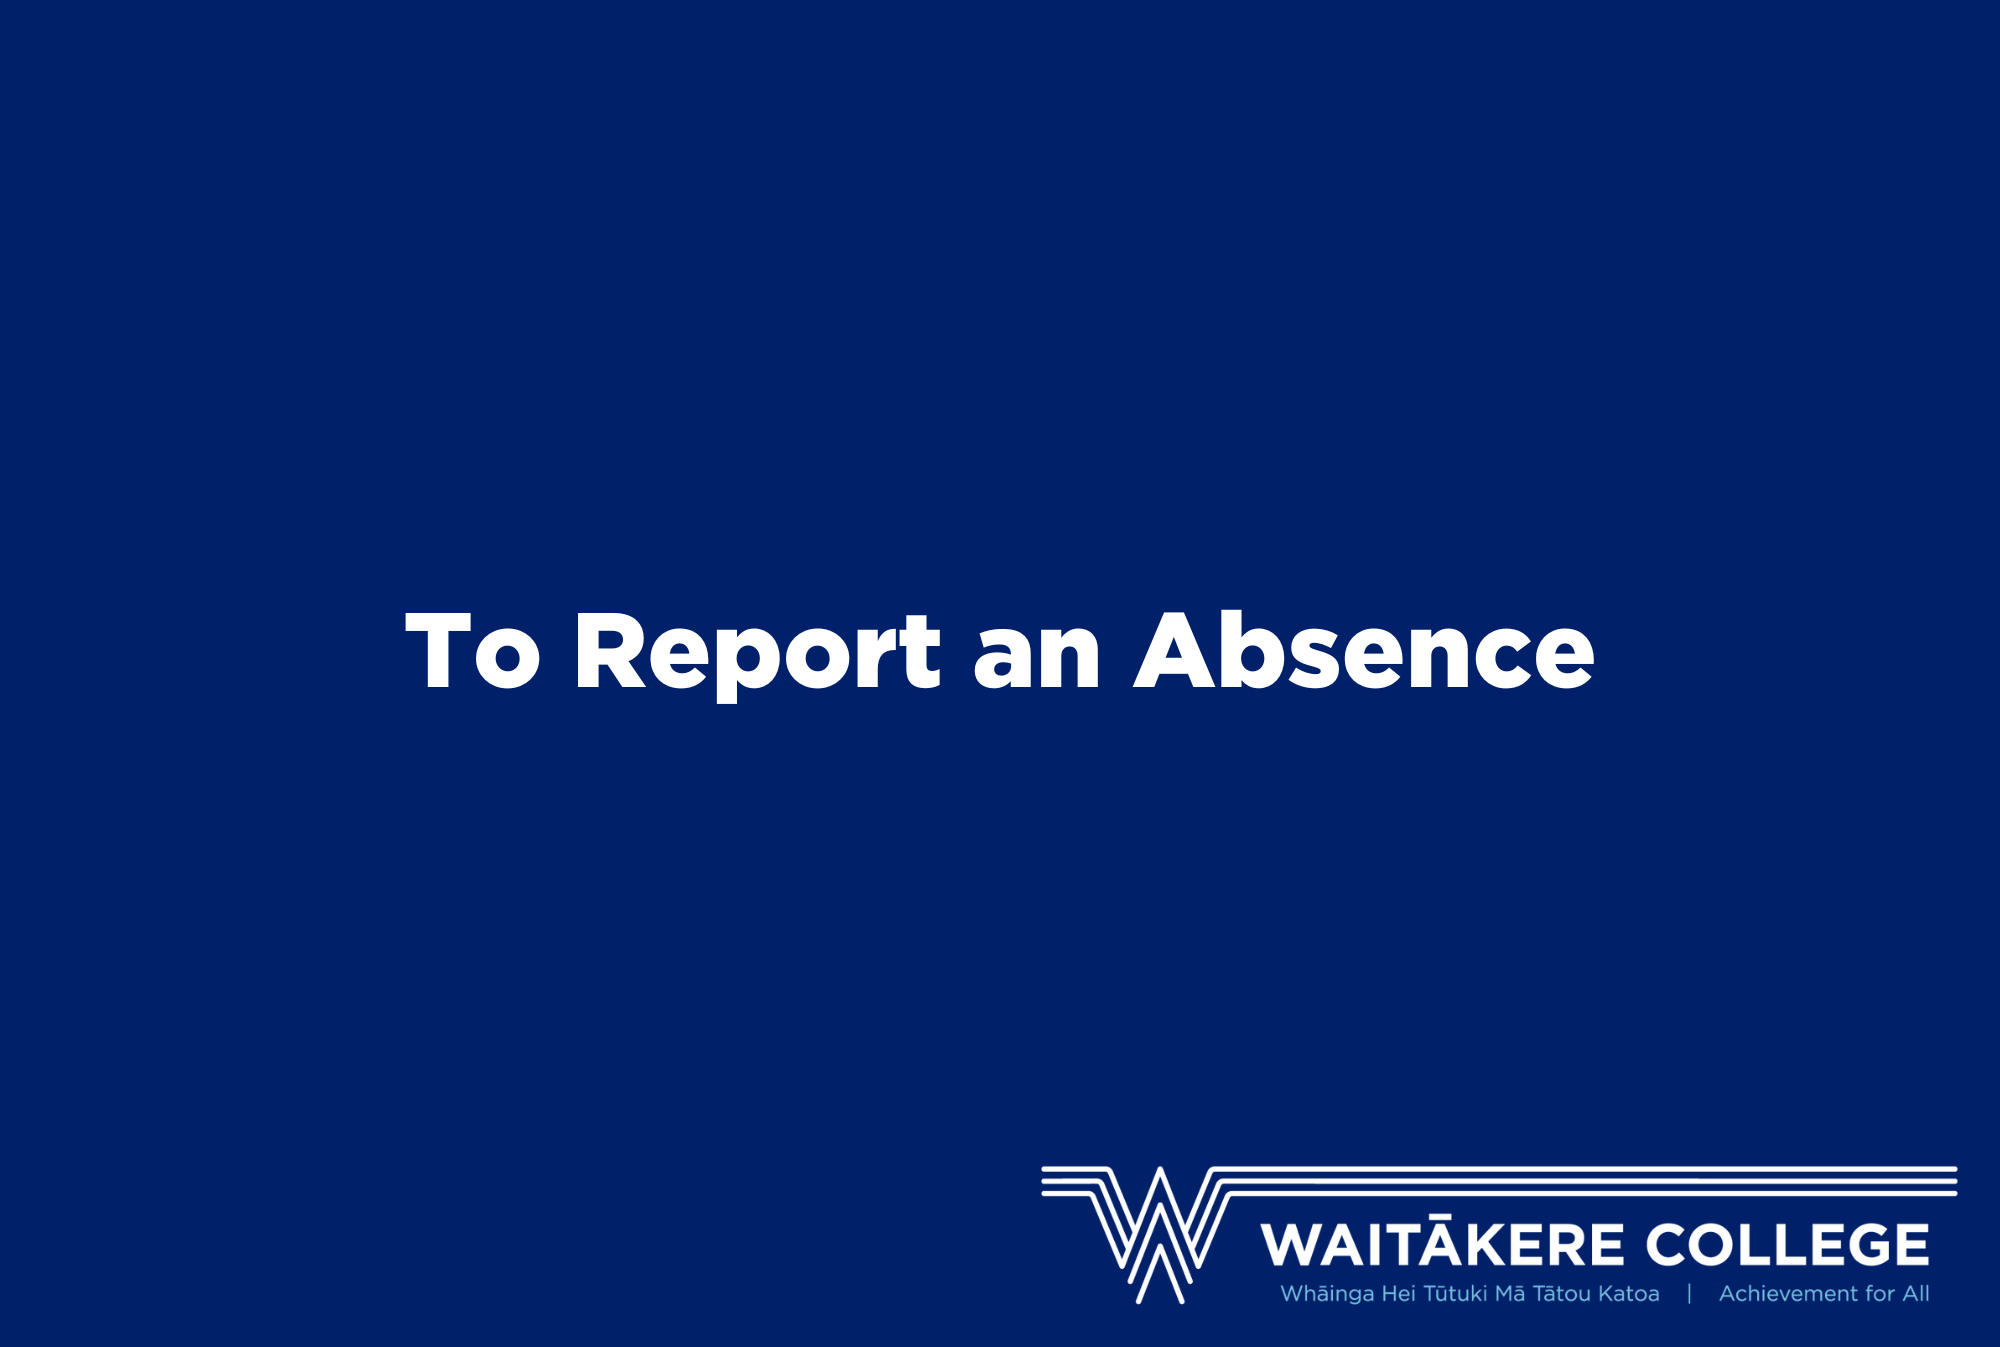 A Reminder On Reporting an Absence